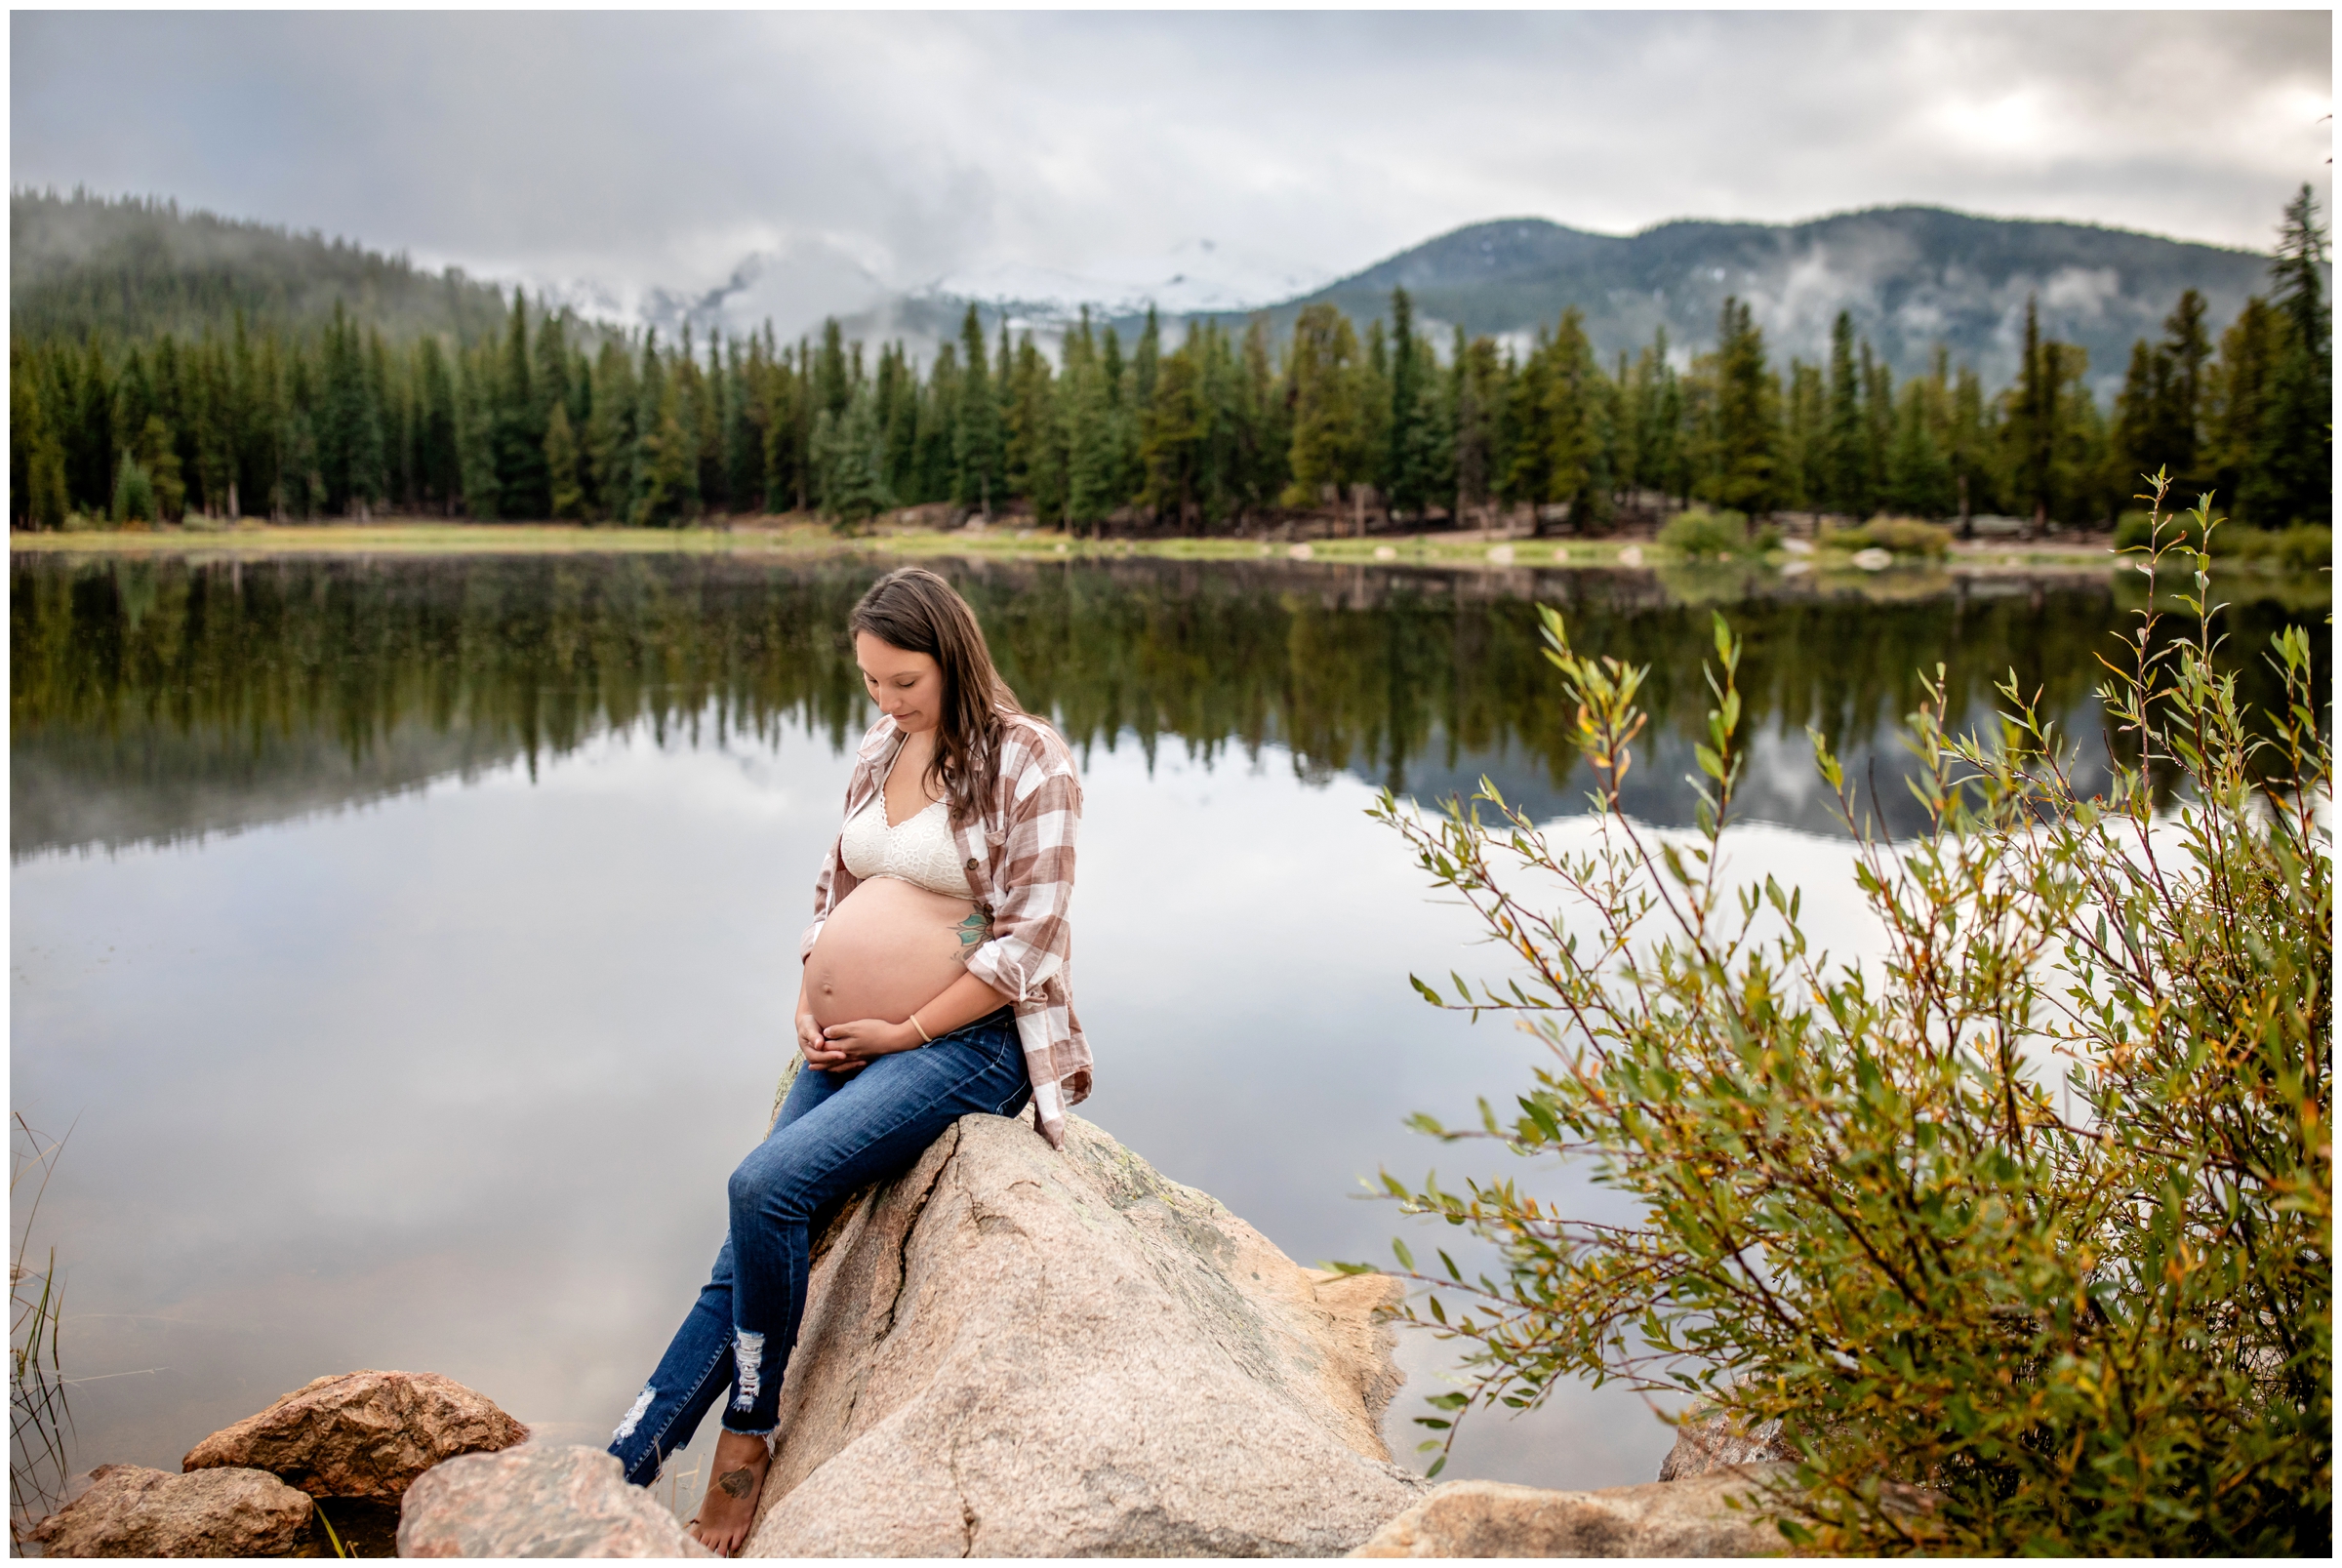 pregnant woman sitting on a rock with mountains and lake in background during Colorado maternity portraits by Plum Pretty Photography